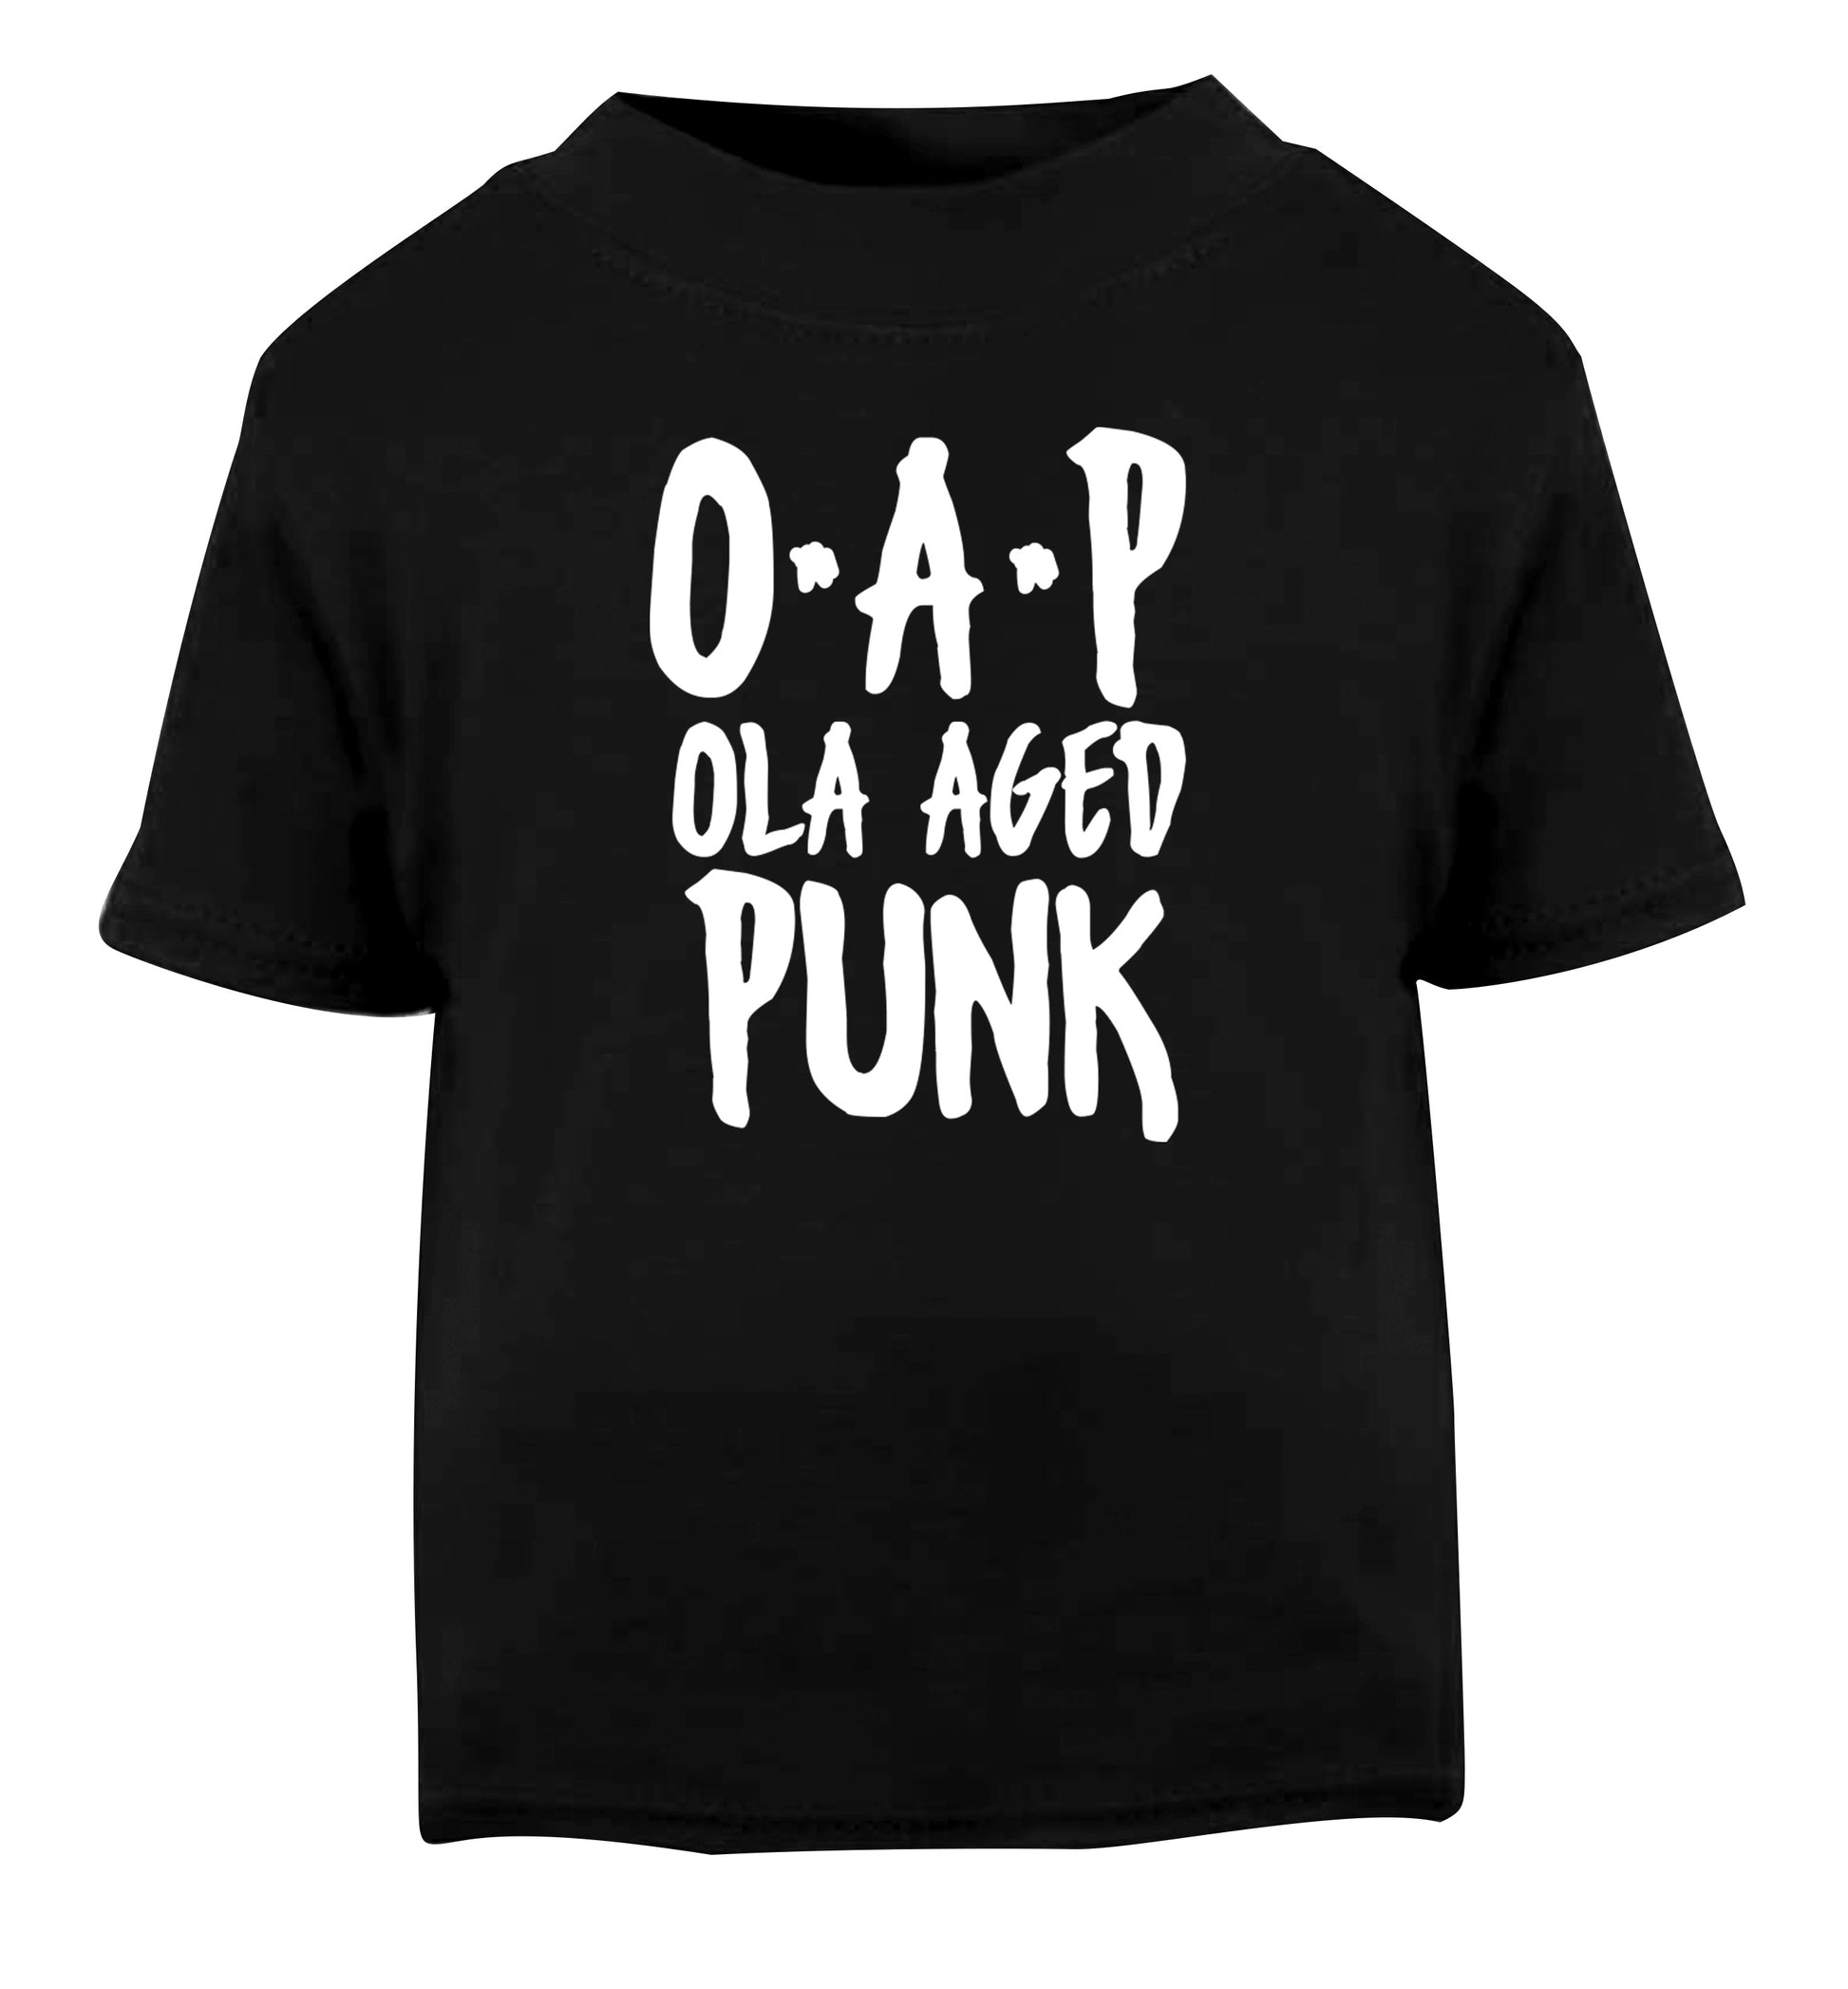 O.A.P Old Aged Punk Black Baby Toddler Tshirt 2 years